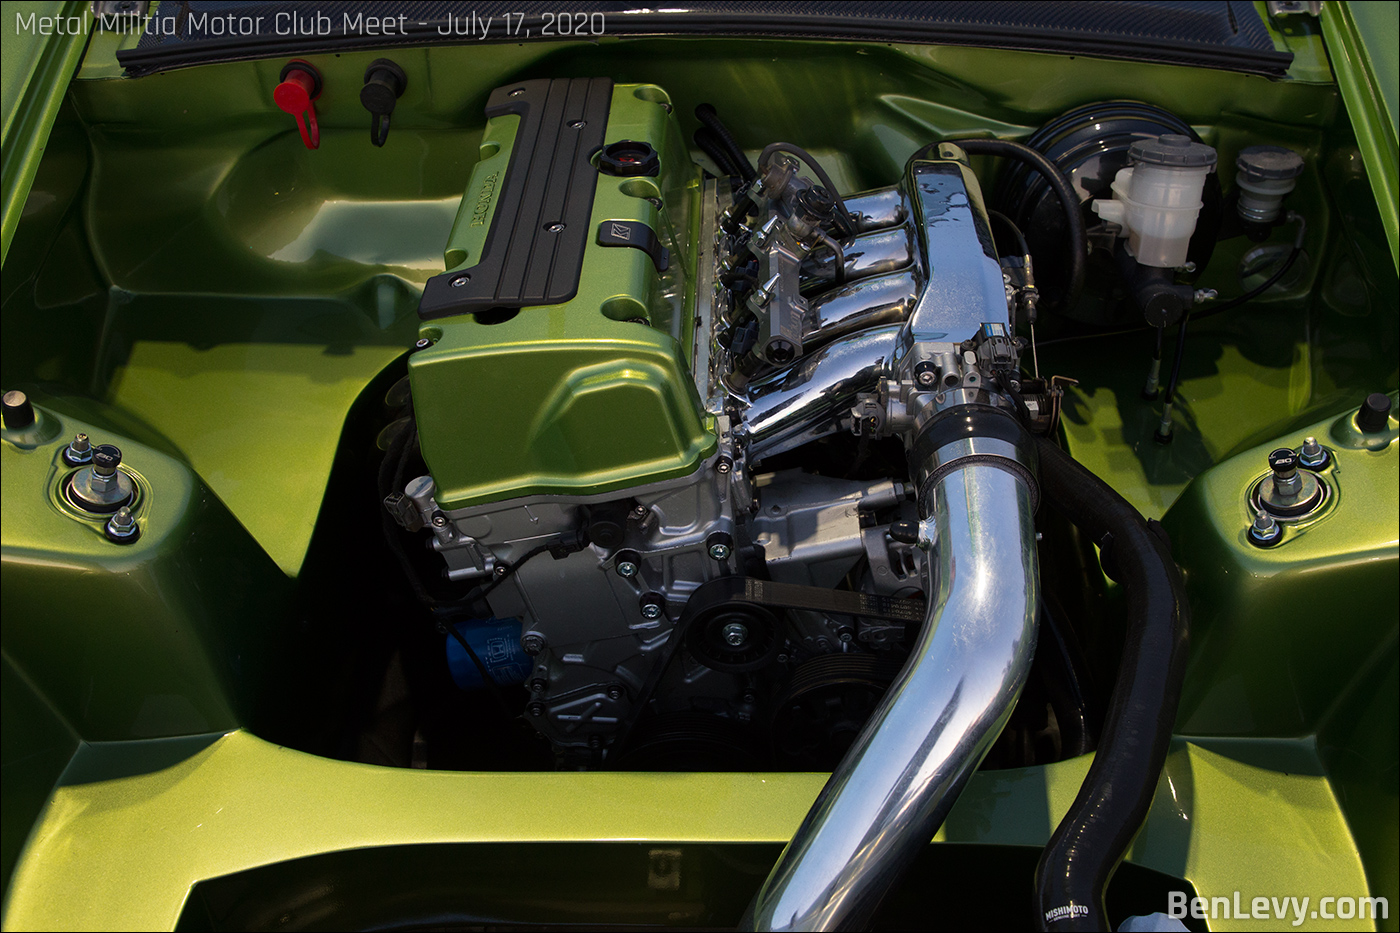 K24 in a very clean Honda S2000 Engine Bay